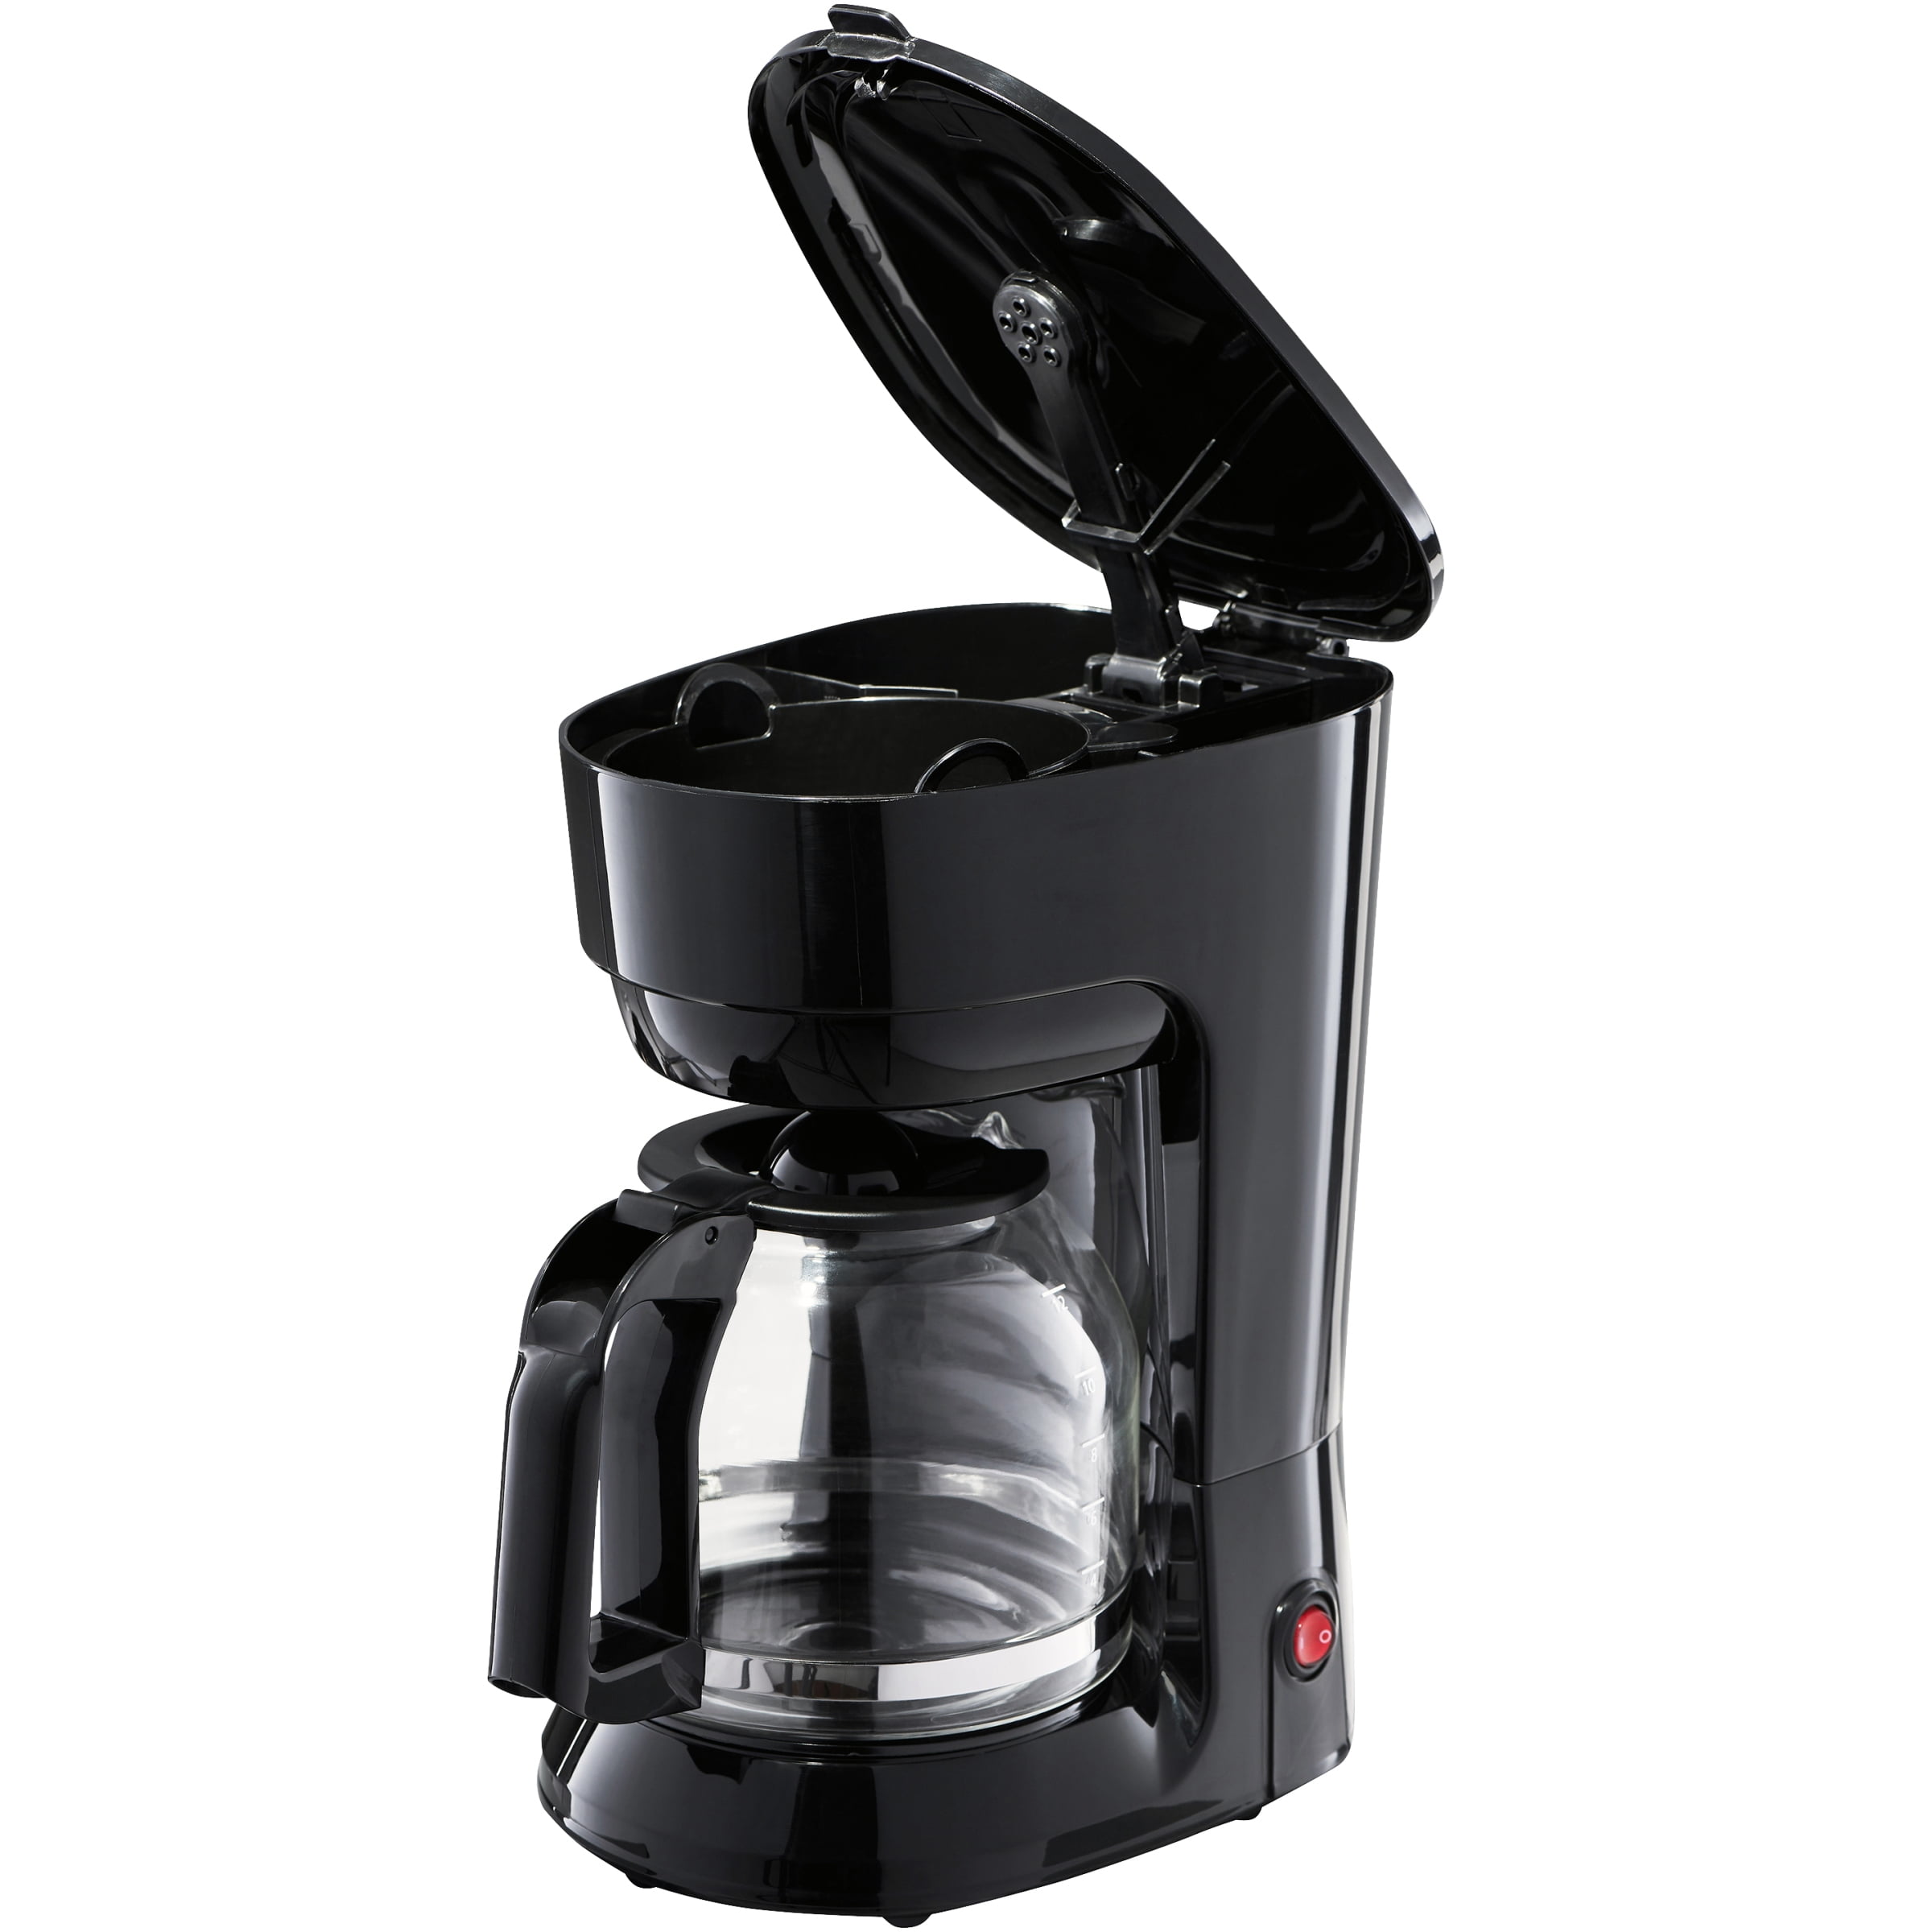 Mainstays Black 12-Cup Coffee Maker with Removable Filter Basket